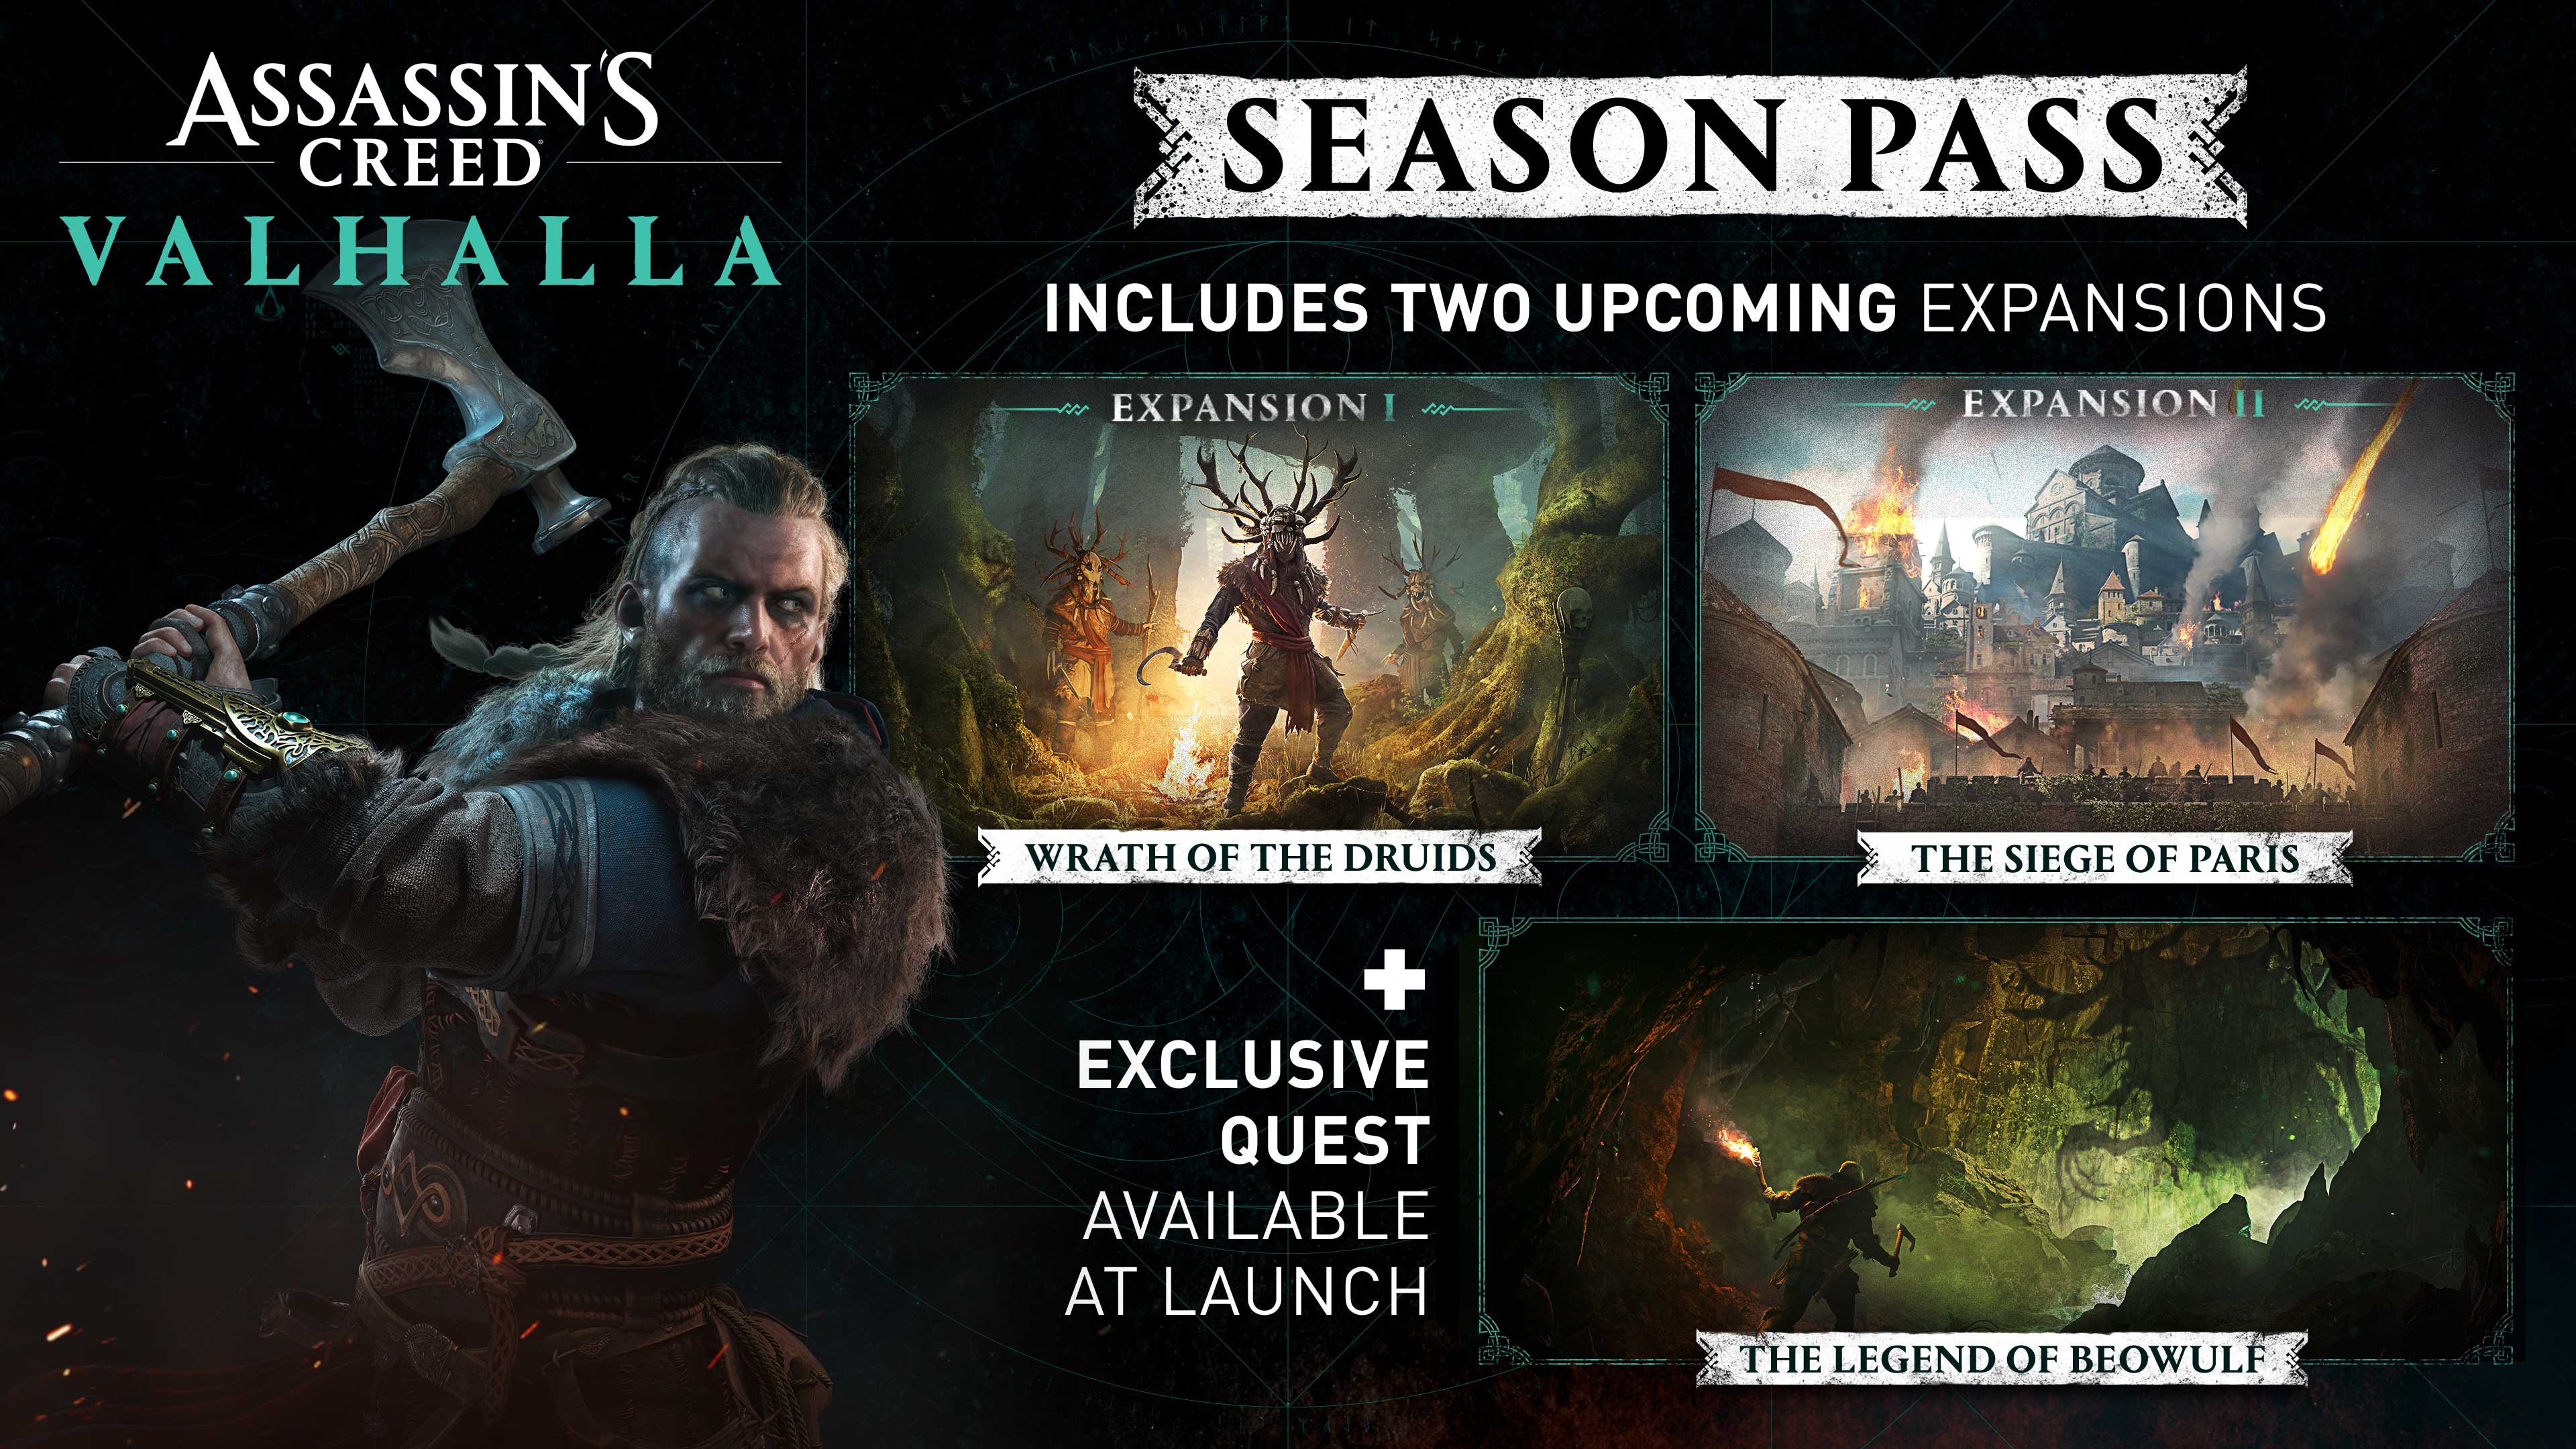 Email promo suggests Assassin's Creed: Valhalla is coming to Game Pass